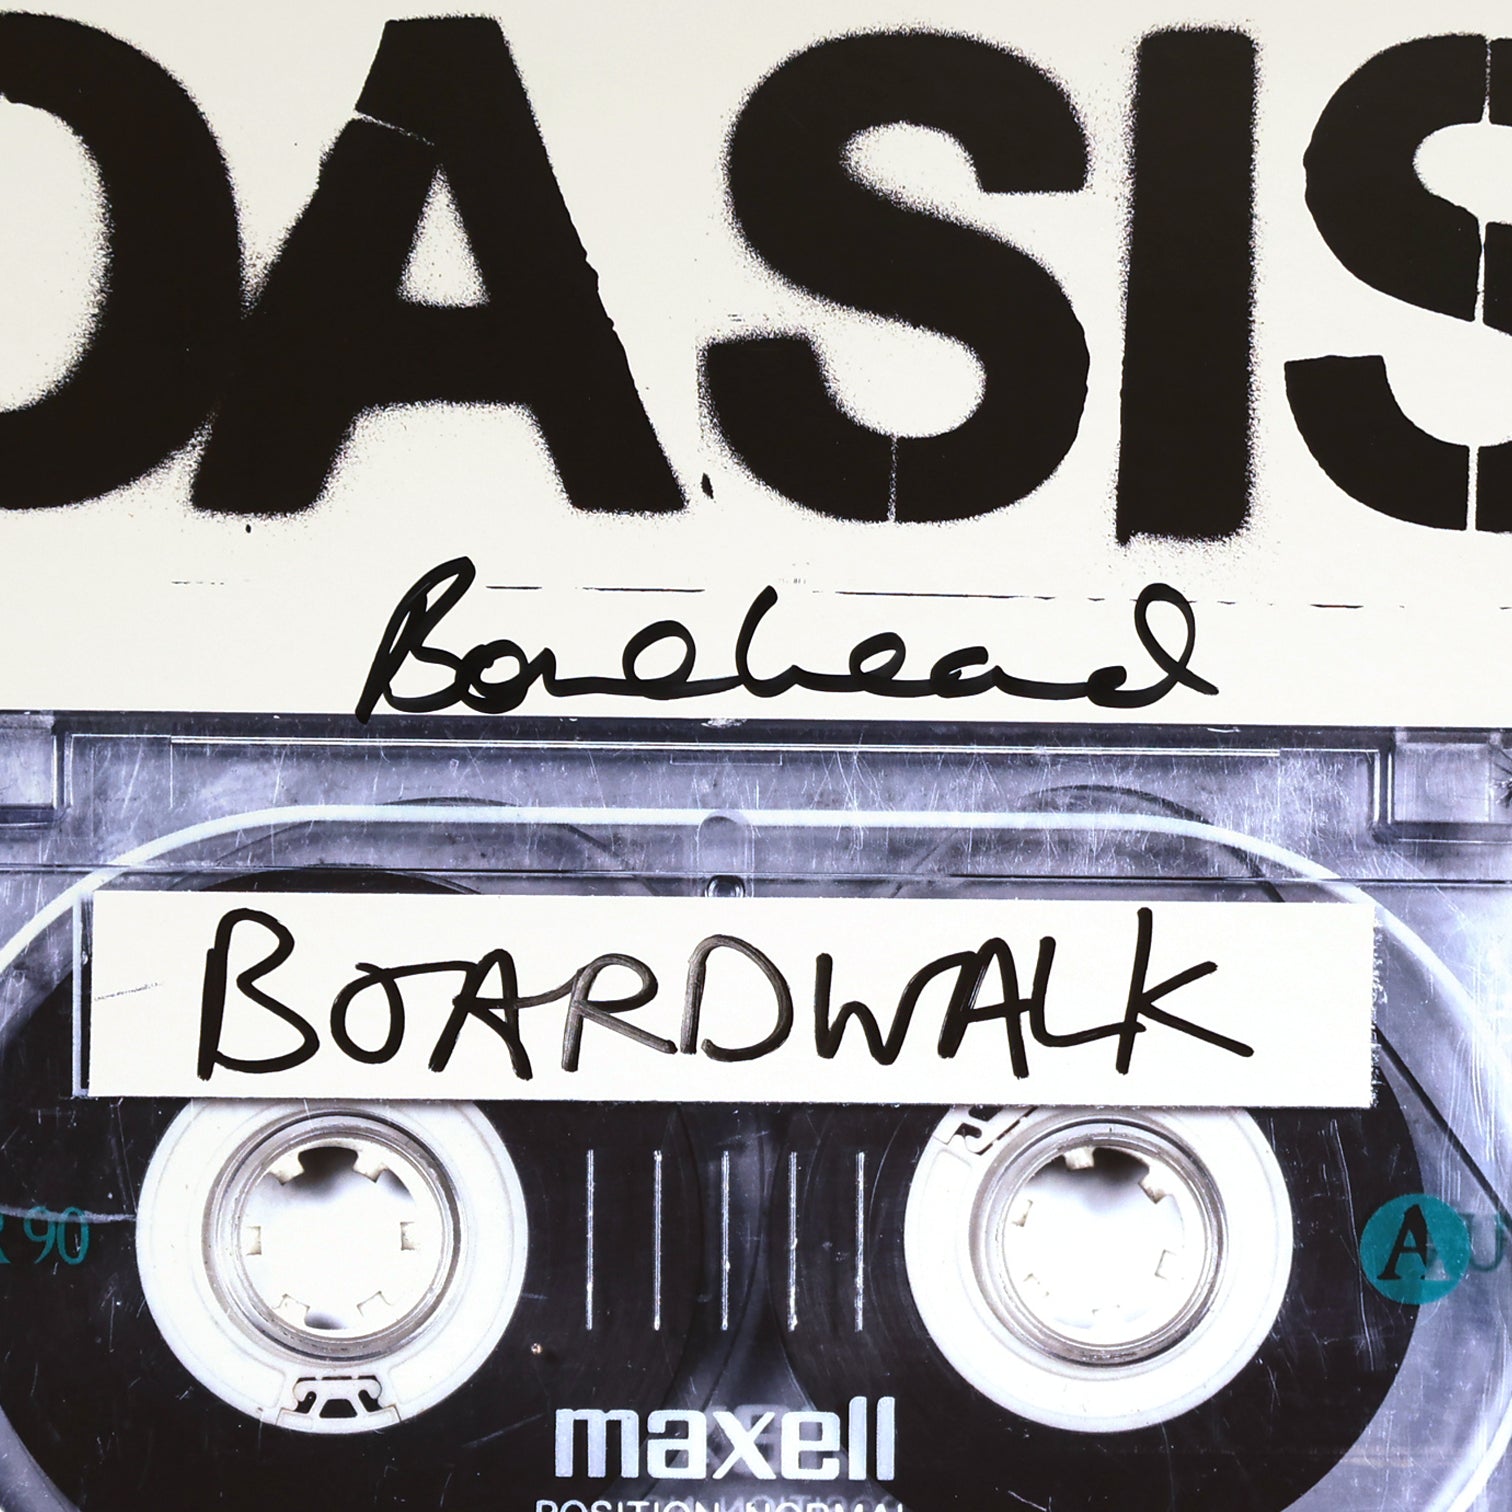 Oasis - Bonehead Signed Live At The Boardwalk - Gig Poster - New Item